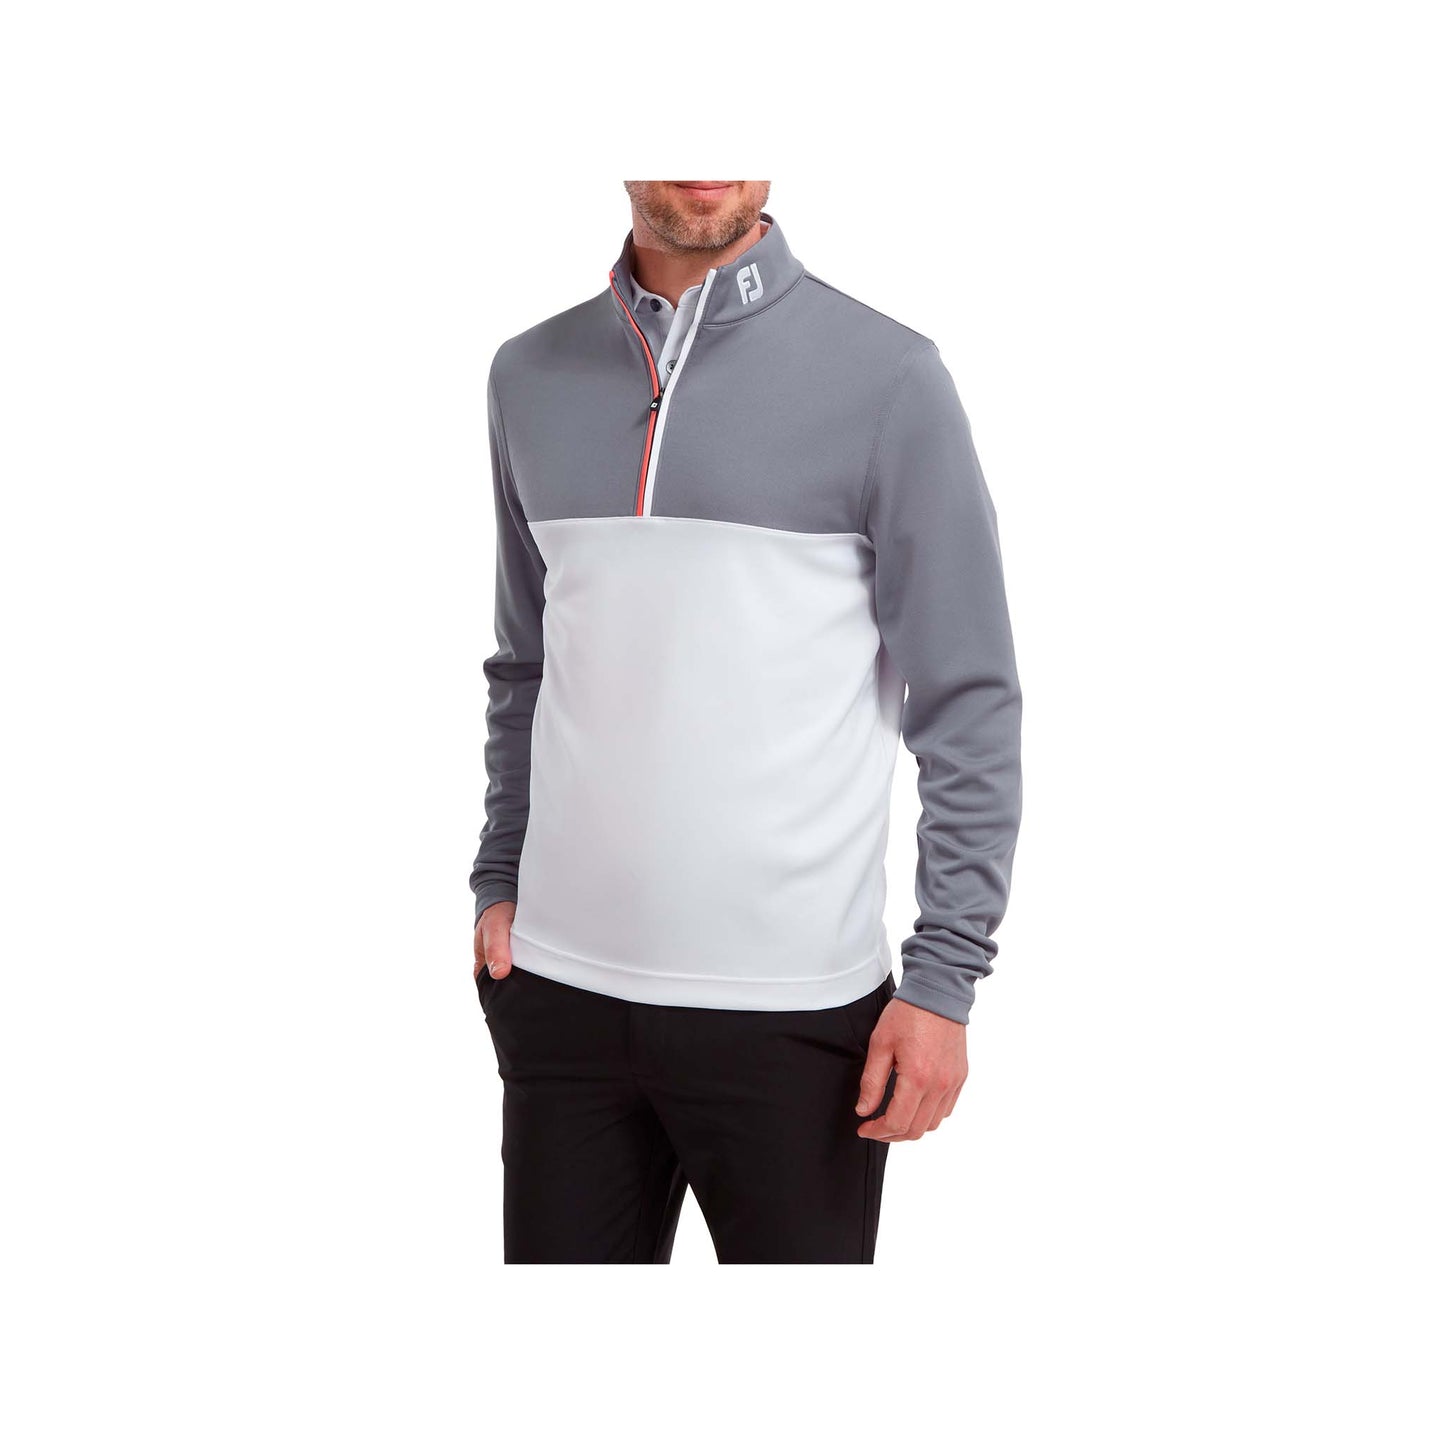 Footjoy Midlayer Colour Block Chill-out